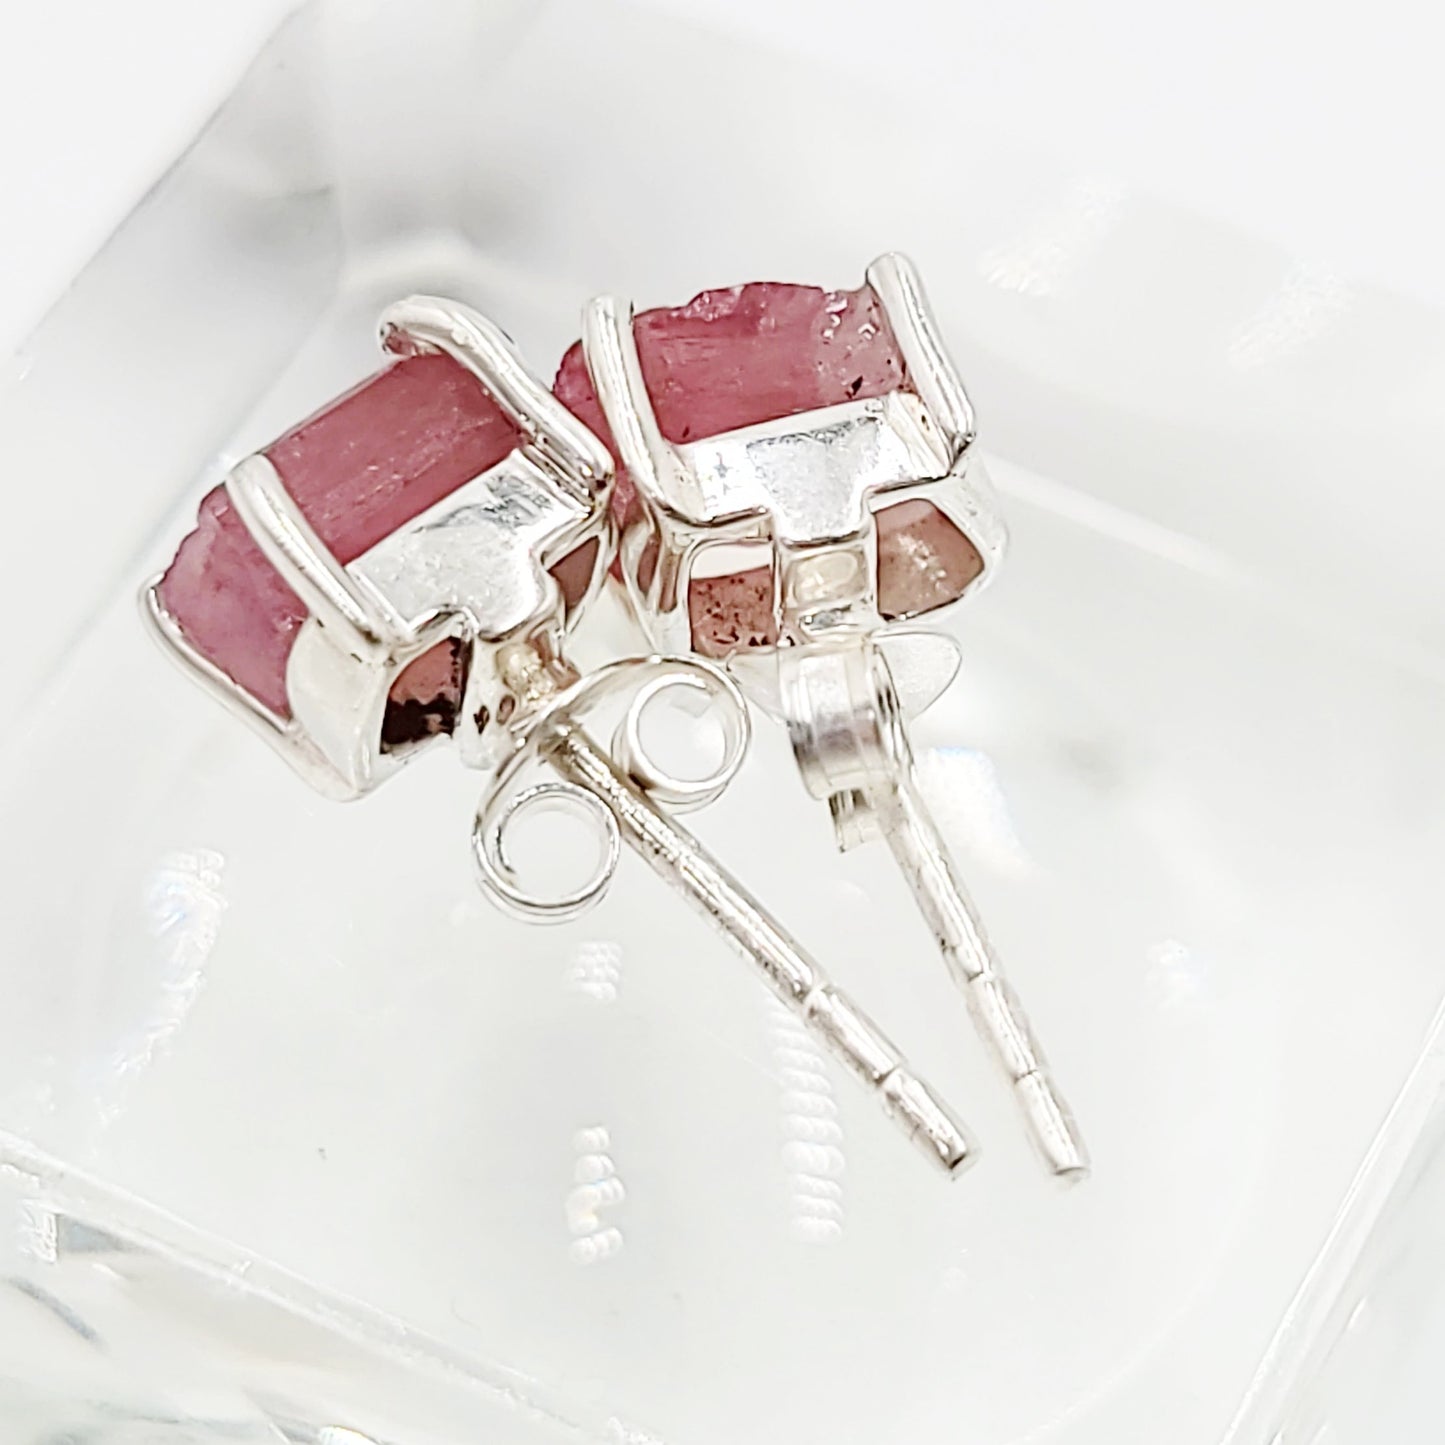 Pink Tourmaline Earrings Rough Sterling Silver Stud - Elevated Metaphysical